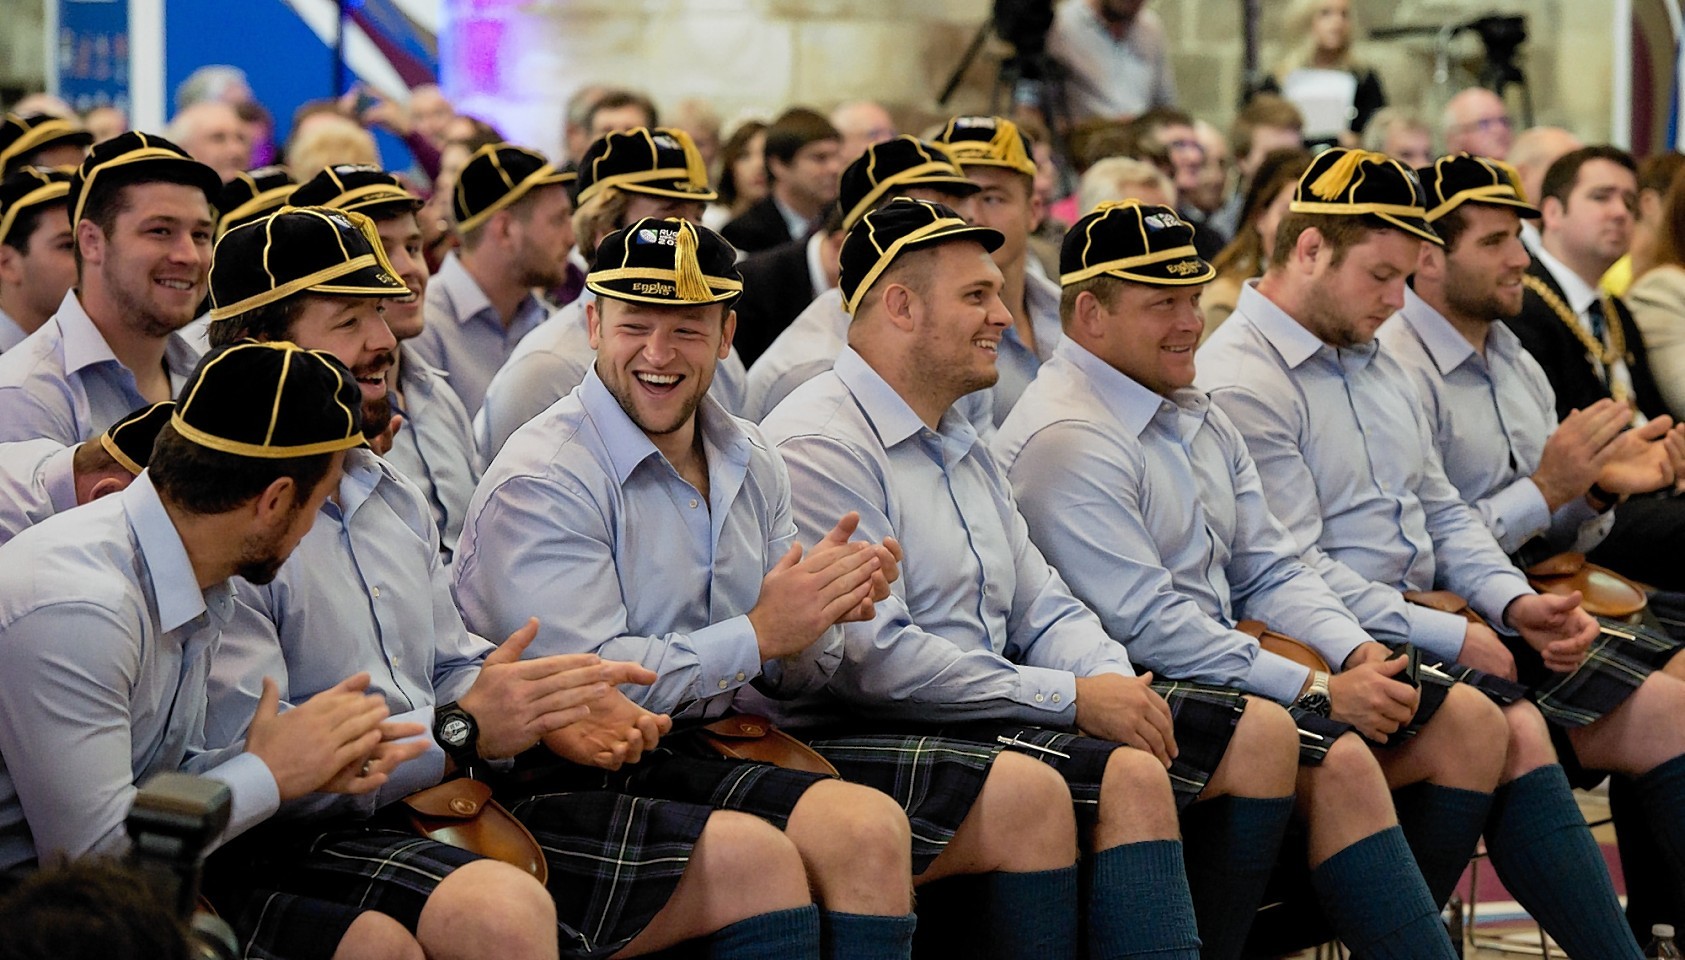 Scotland players with their World Cup caps during the RWC 2015 Welcome Ceremony